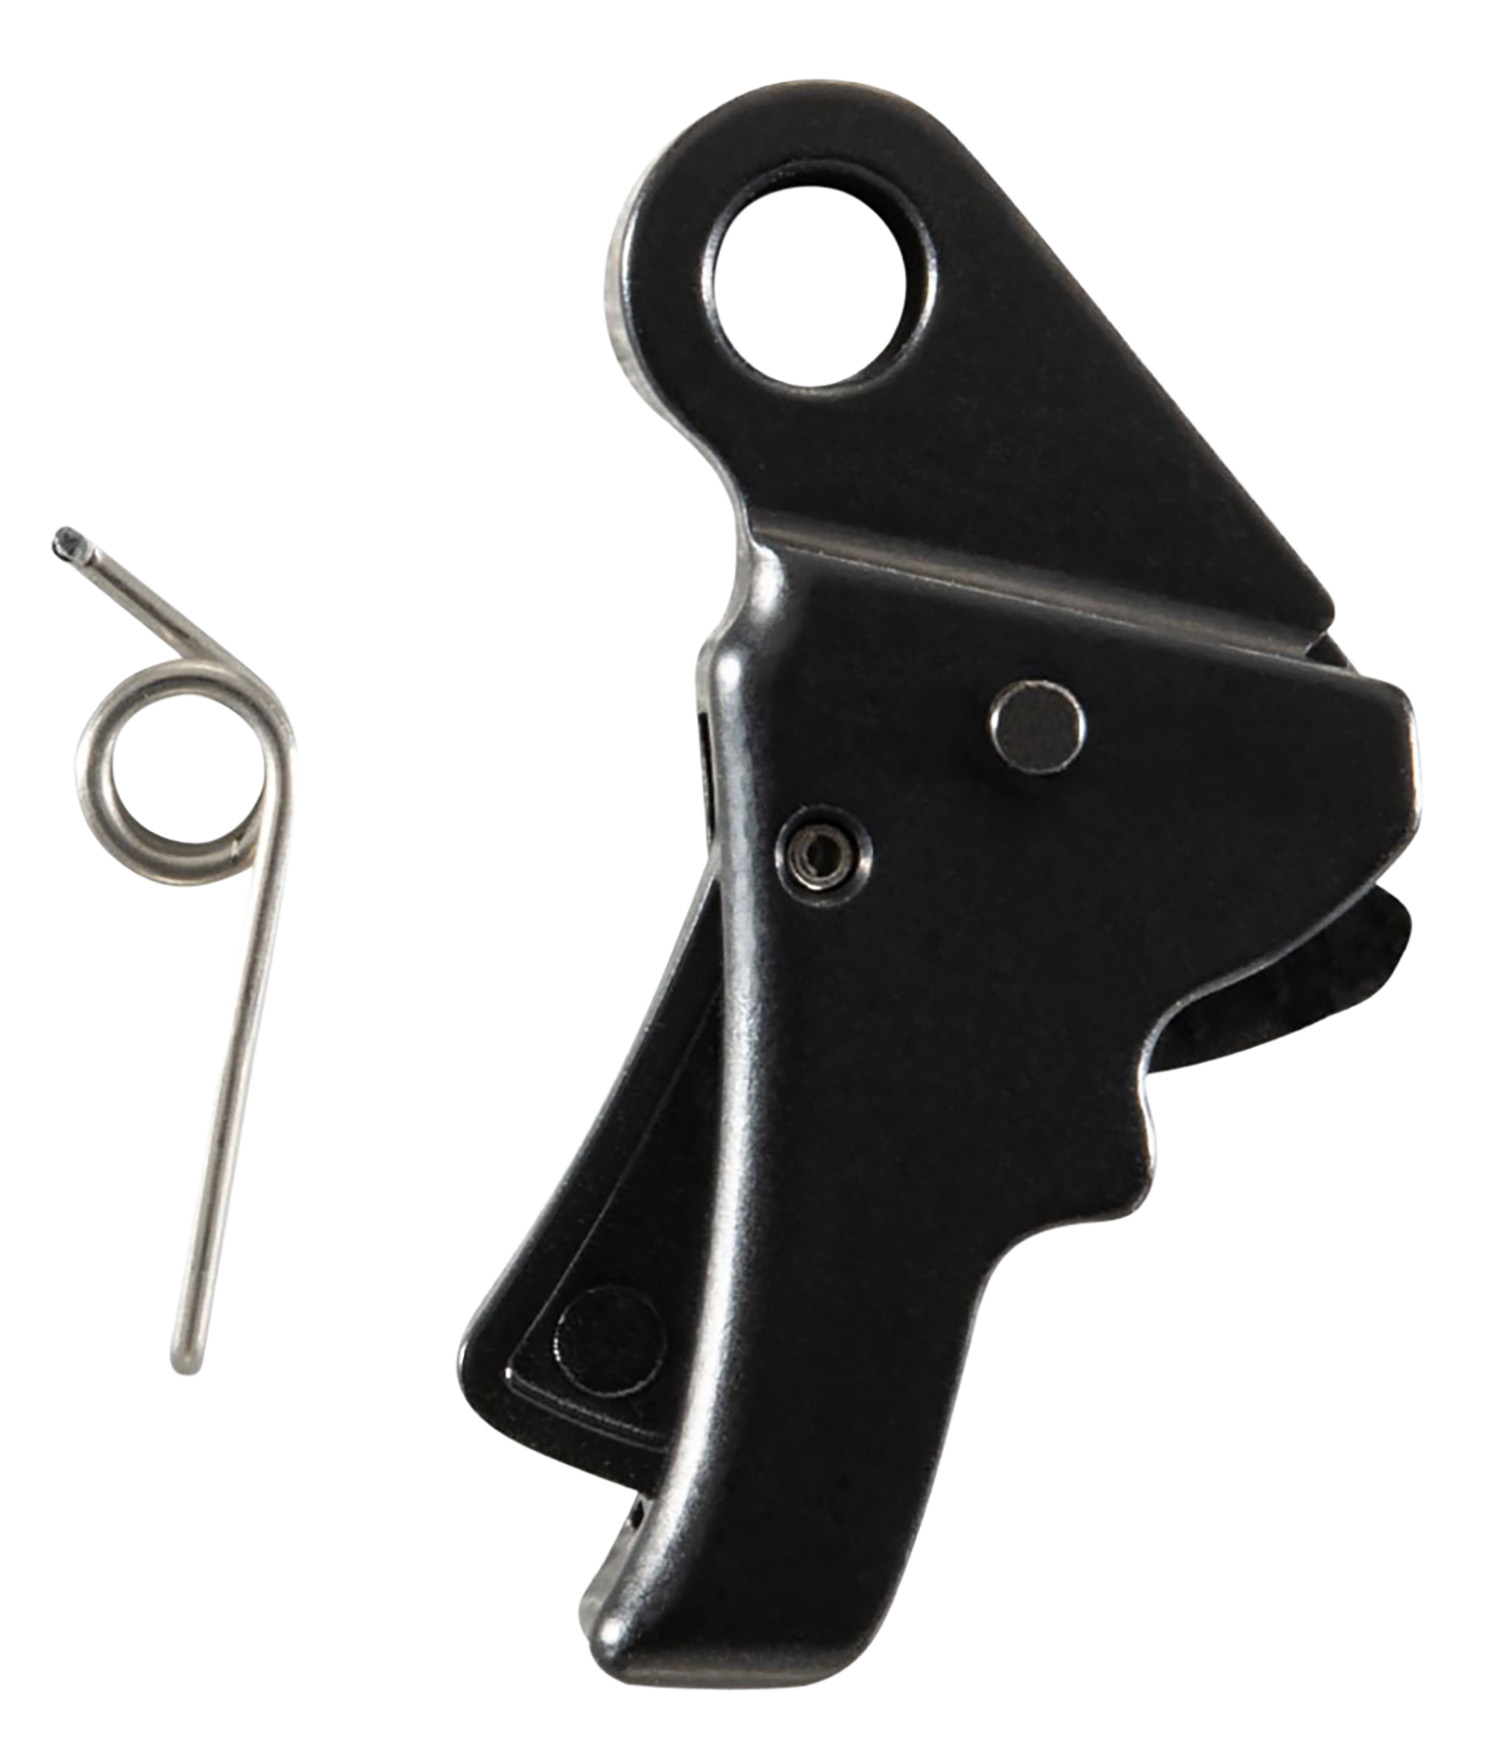 Apex Tactical 115113 Action Enhancement Trigger Kit Drop-In Flat Trigger with 5-5.50 lbs Draw Weight & Black Finish for Springfield XD-S Mod.2